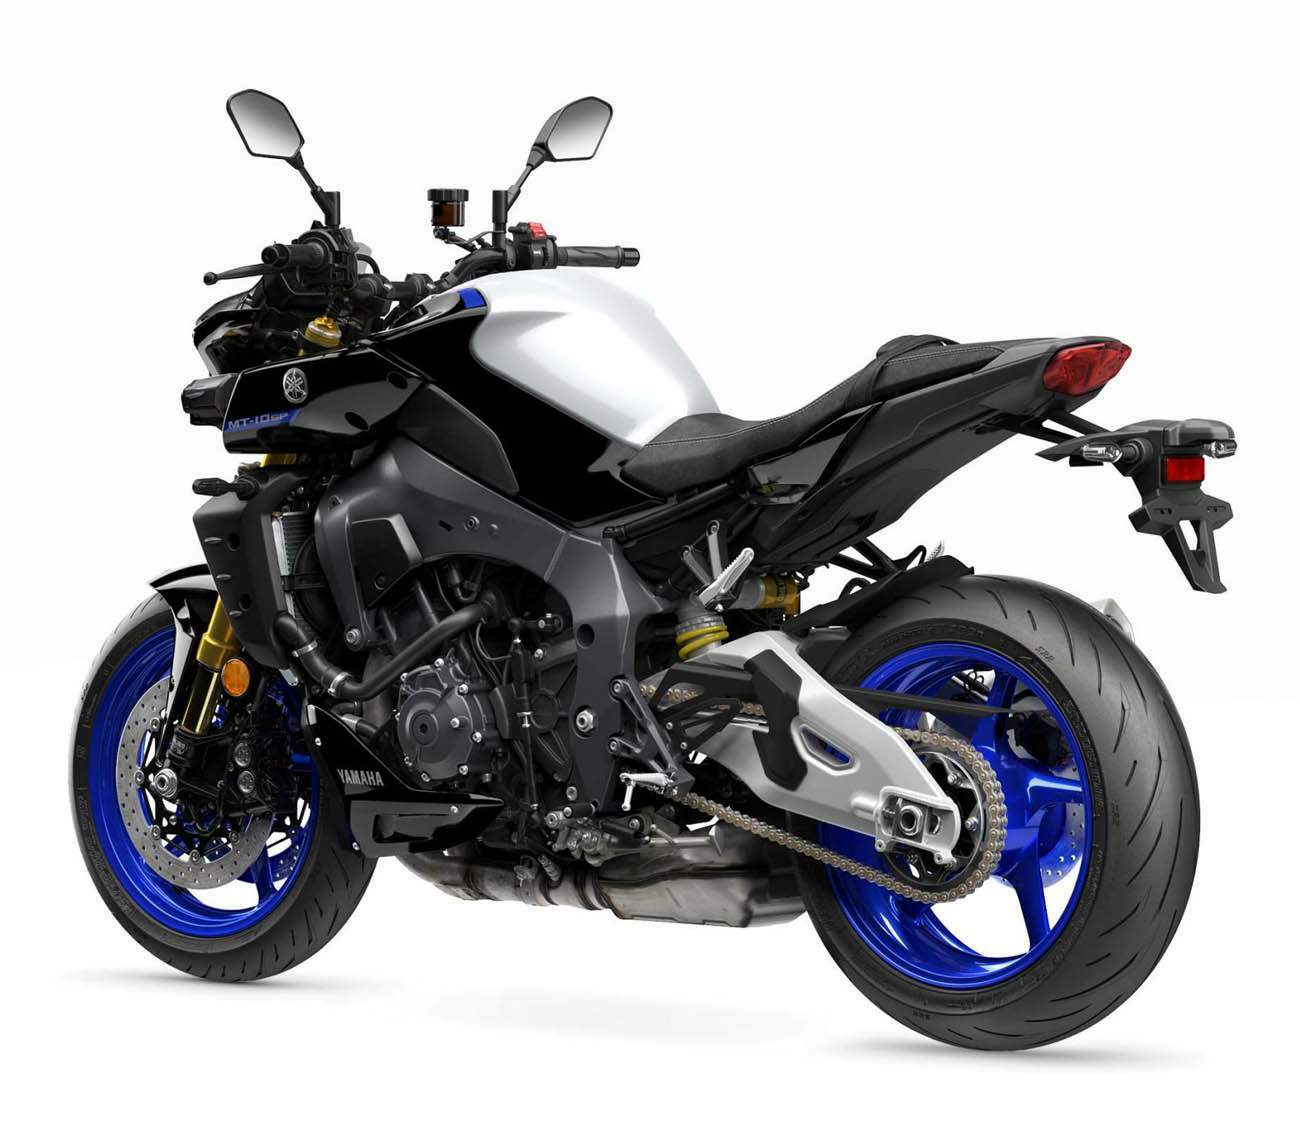 Yamaha MT-10SP technical specifications